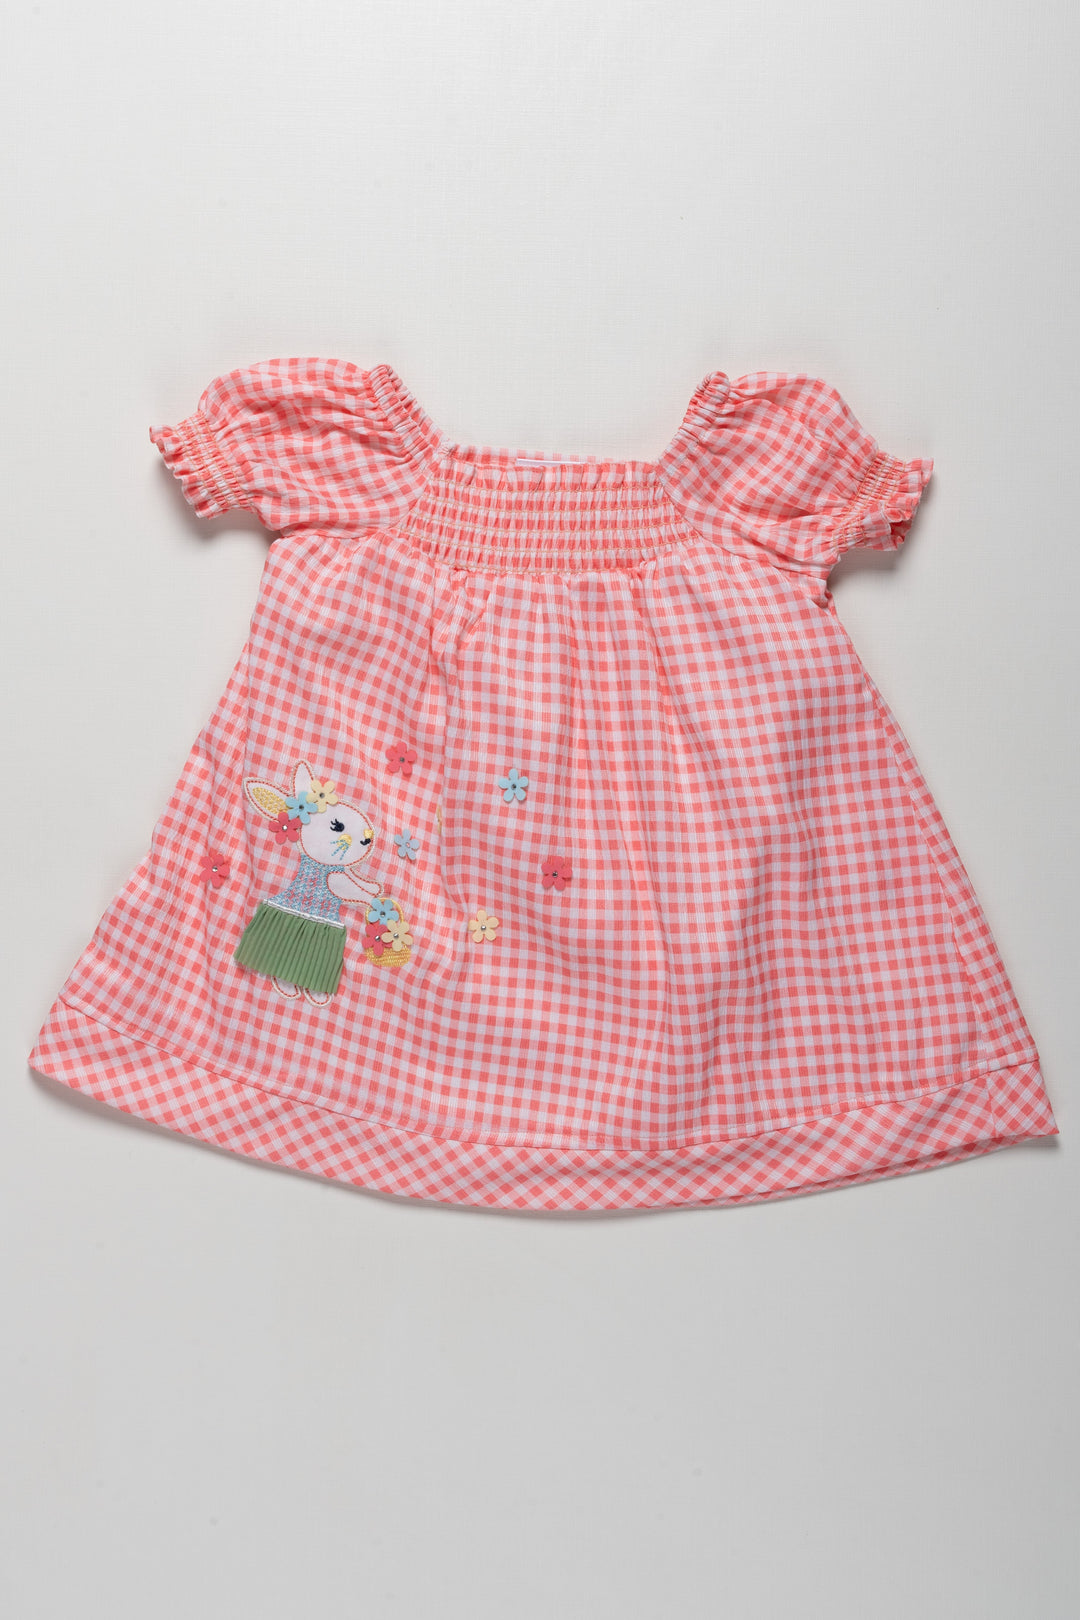 The Nesavu Girls Cotton Frock Adorable Girls Checkered Cotton Frock with Bunny Embroidery Nesavu 14 (6M) / Salmon / Cotton GFC1327A-14 Adorable Girls Checkered Cotton Frock with Bunny Embroidery | The Nesavu